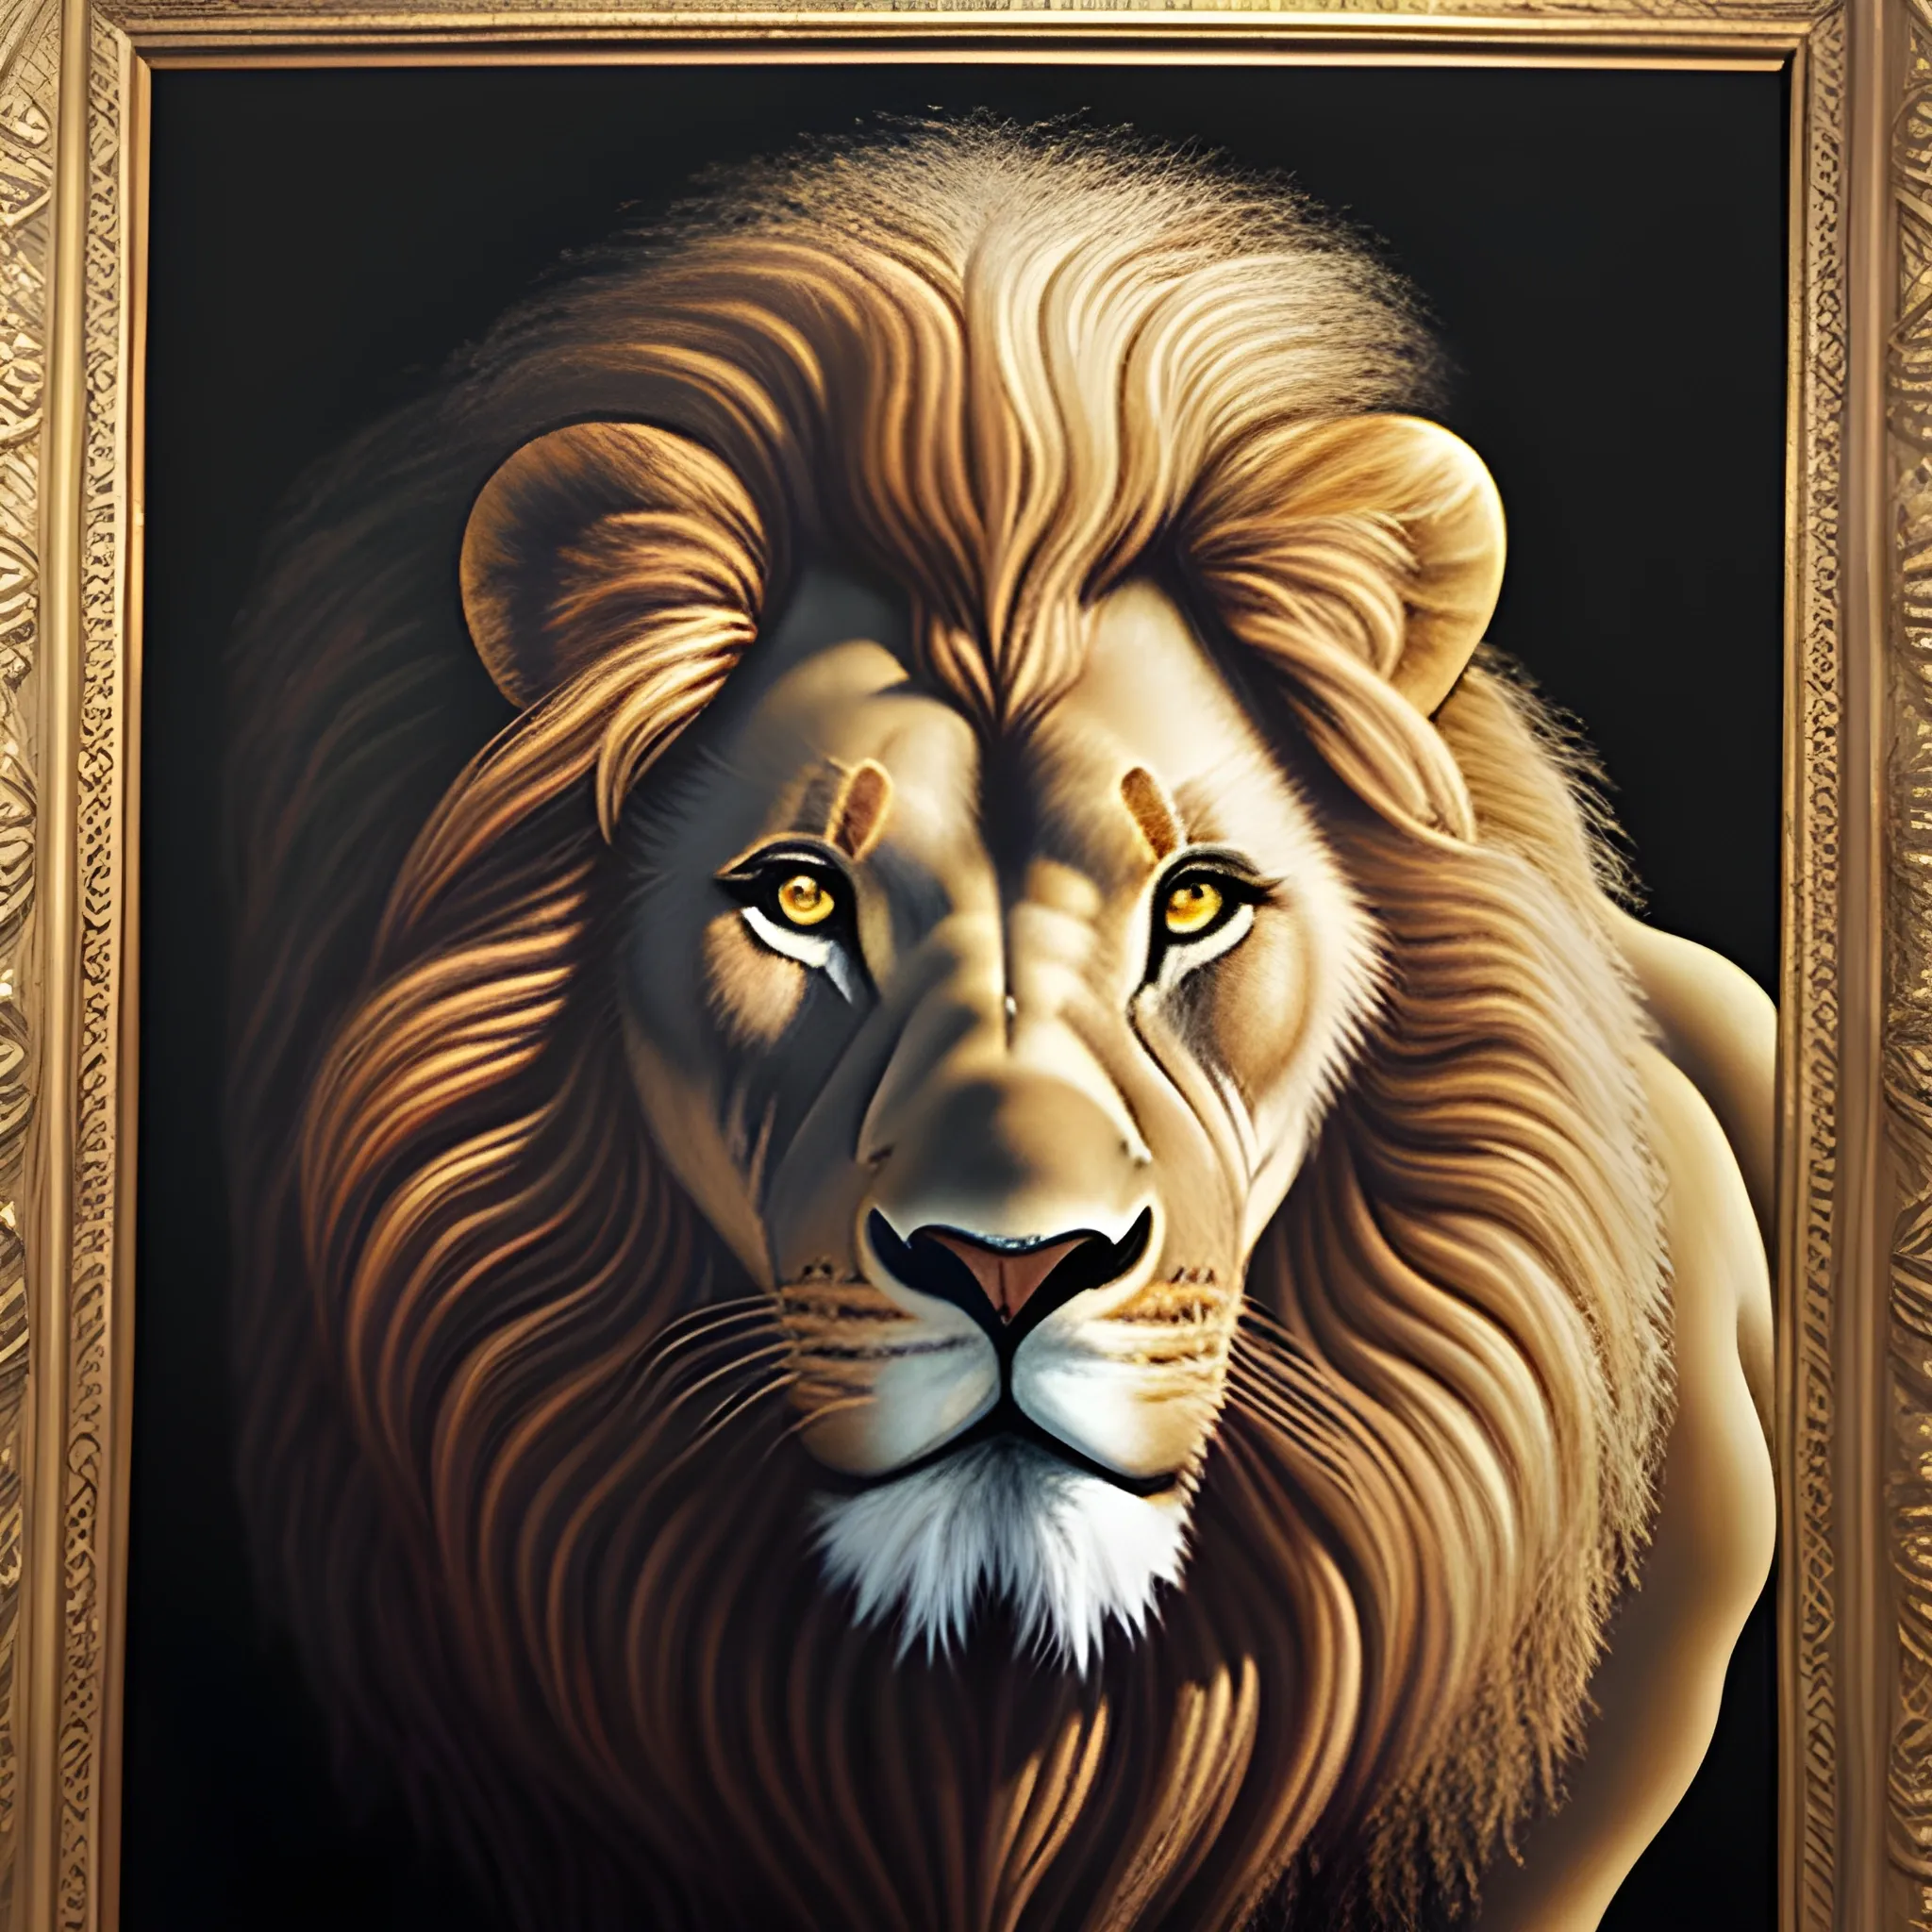 Lion Aslan from The Chronicles of Narnia by C. S. Lewis. Original oil painting on black velvet by E. Felix. f121